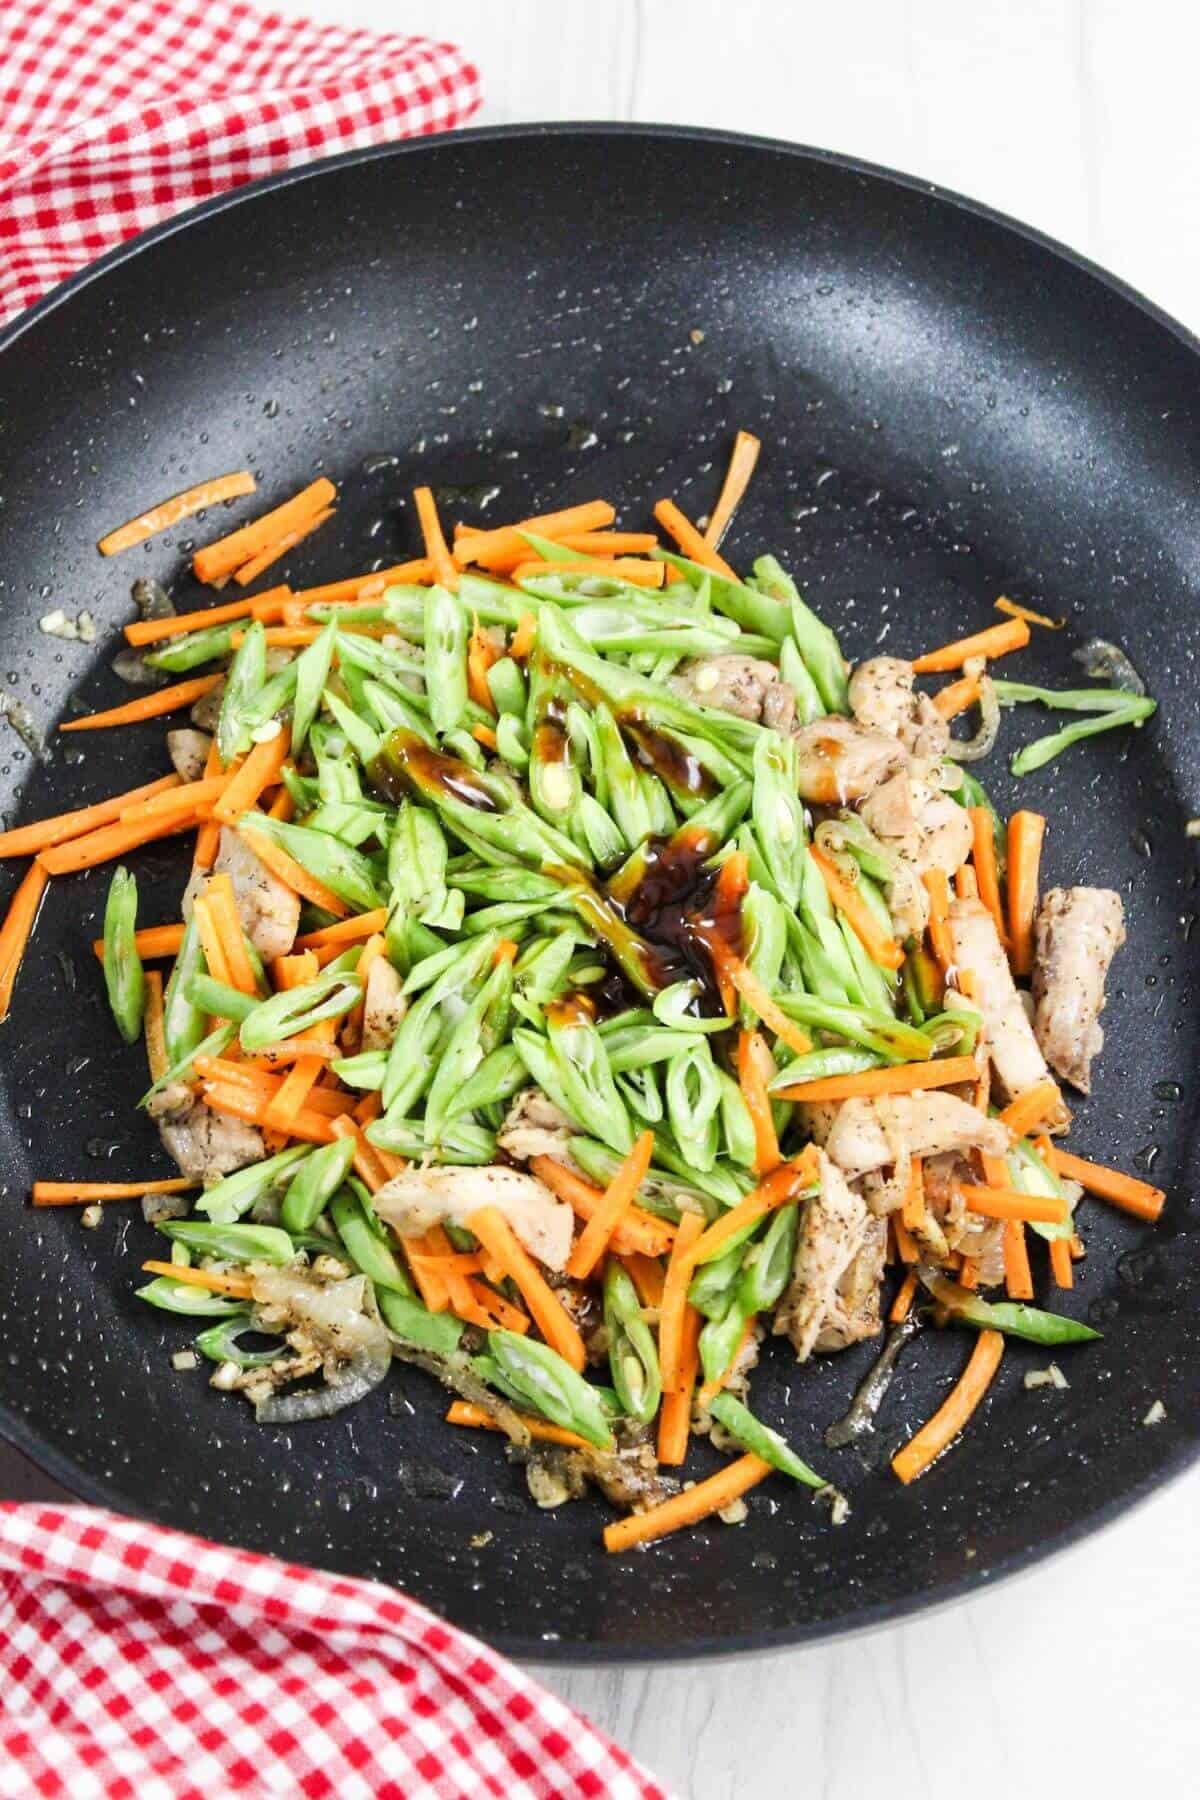 A frying pan with carrots, green beans, and chicken in it.